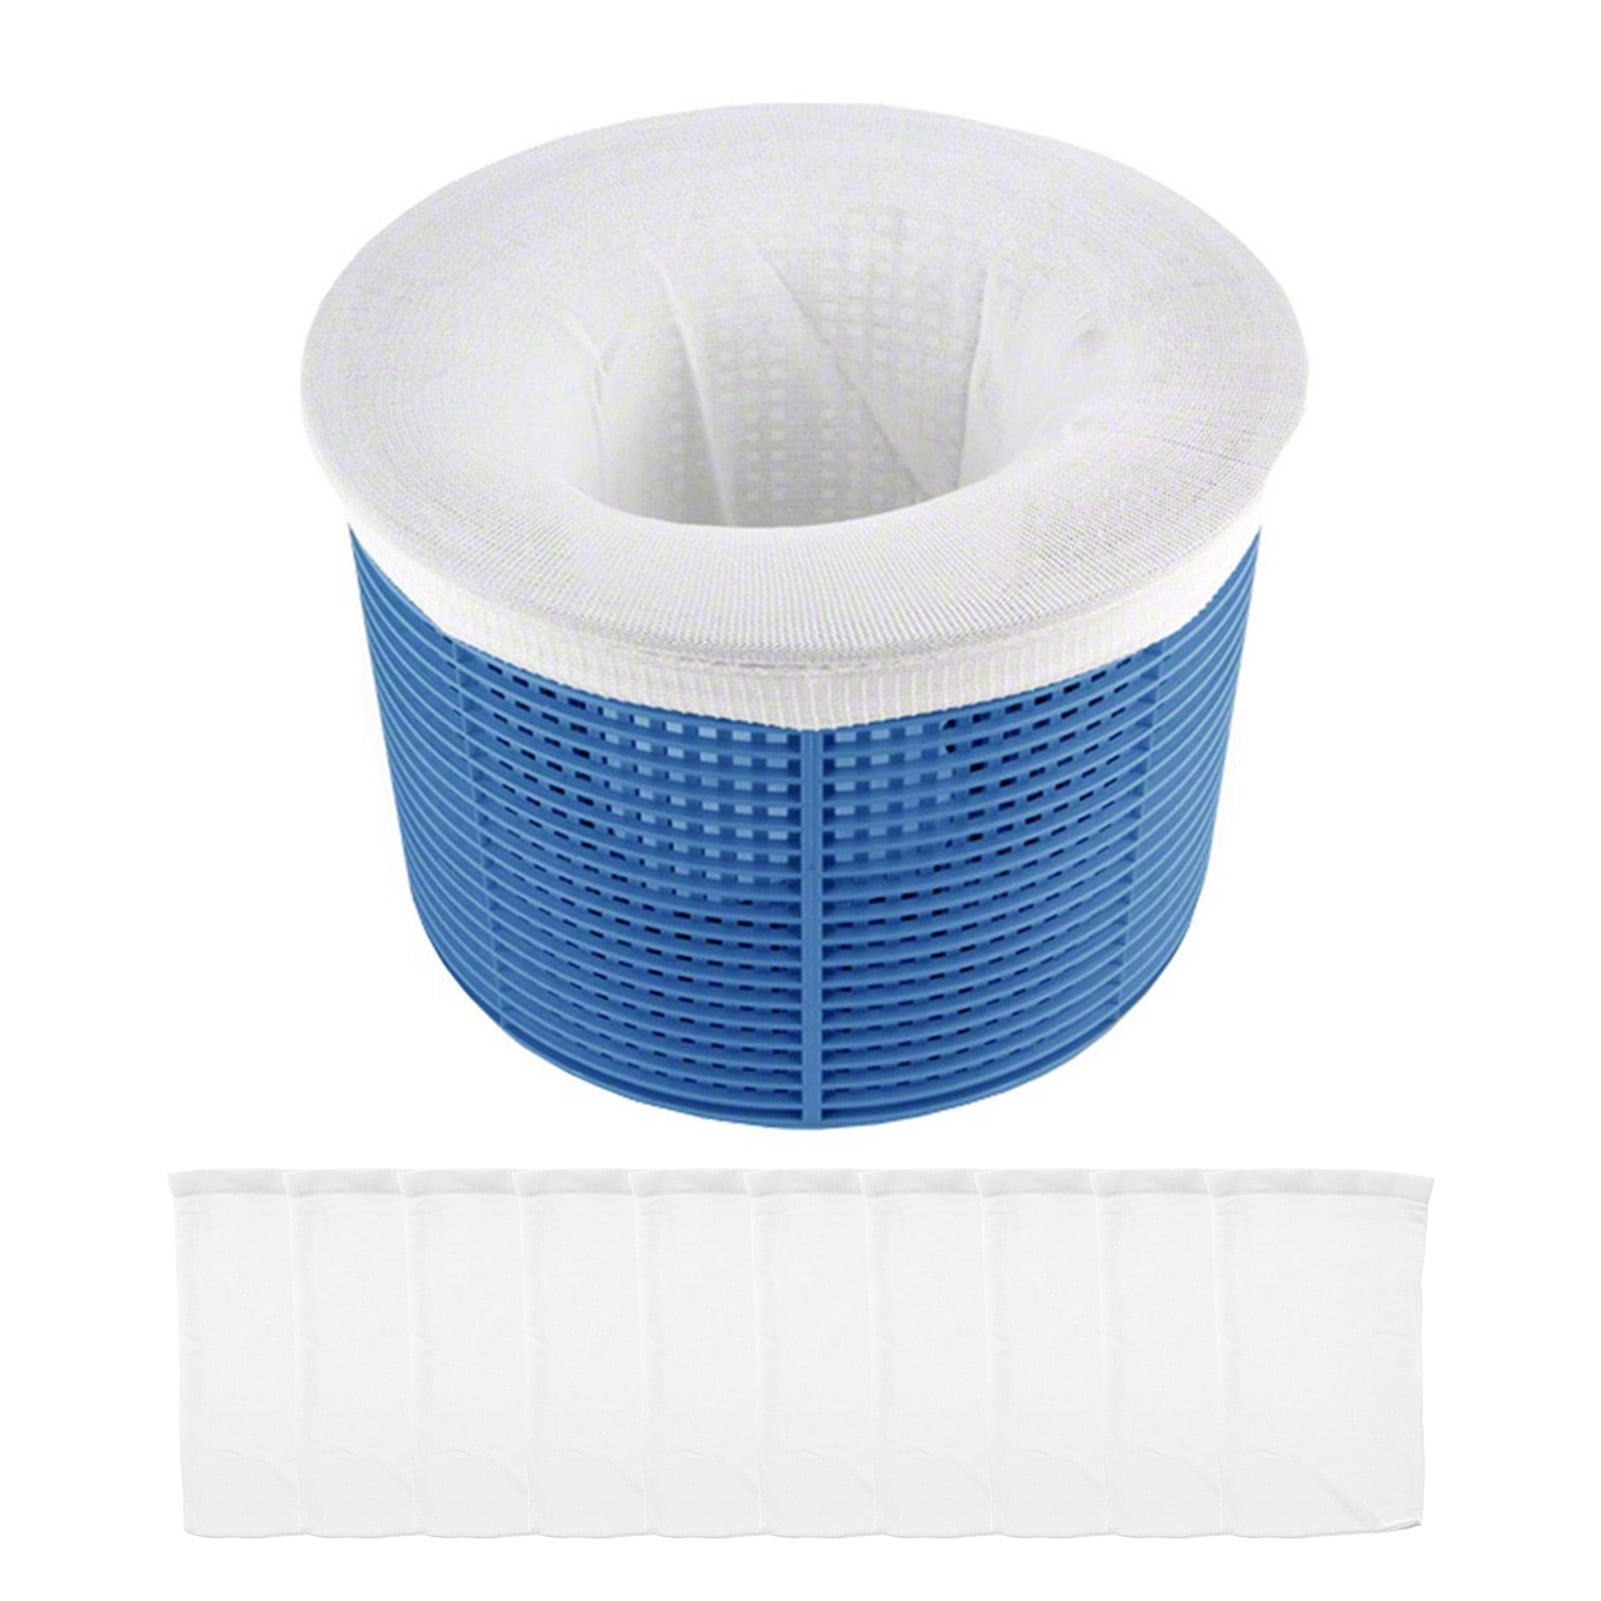 10PCS Pool Skimmer Socks Strong Elastic Nylon Fabric Filters Baskets Skimmer Nets Saver for Debris and Leaves in Yard Pools or Outdoor Spa Tubs White